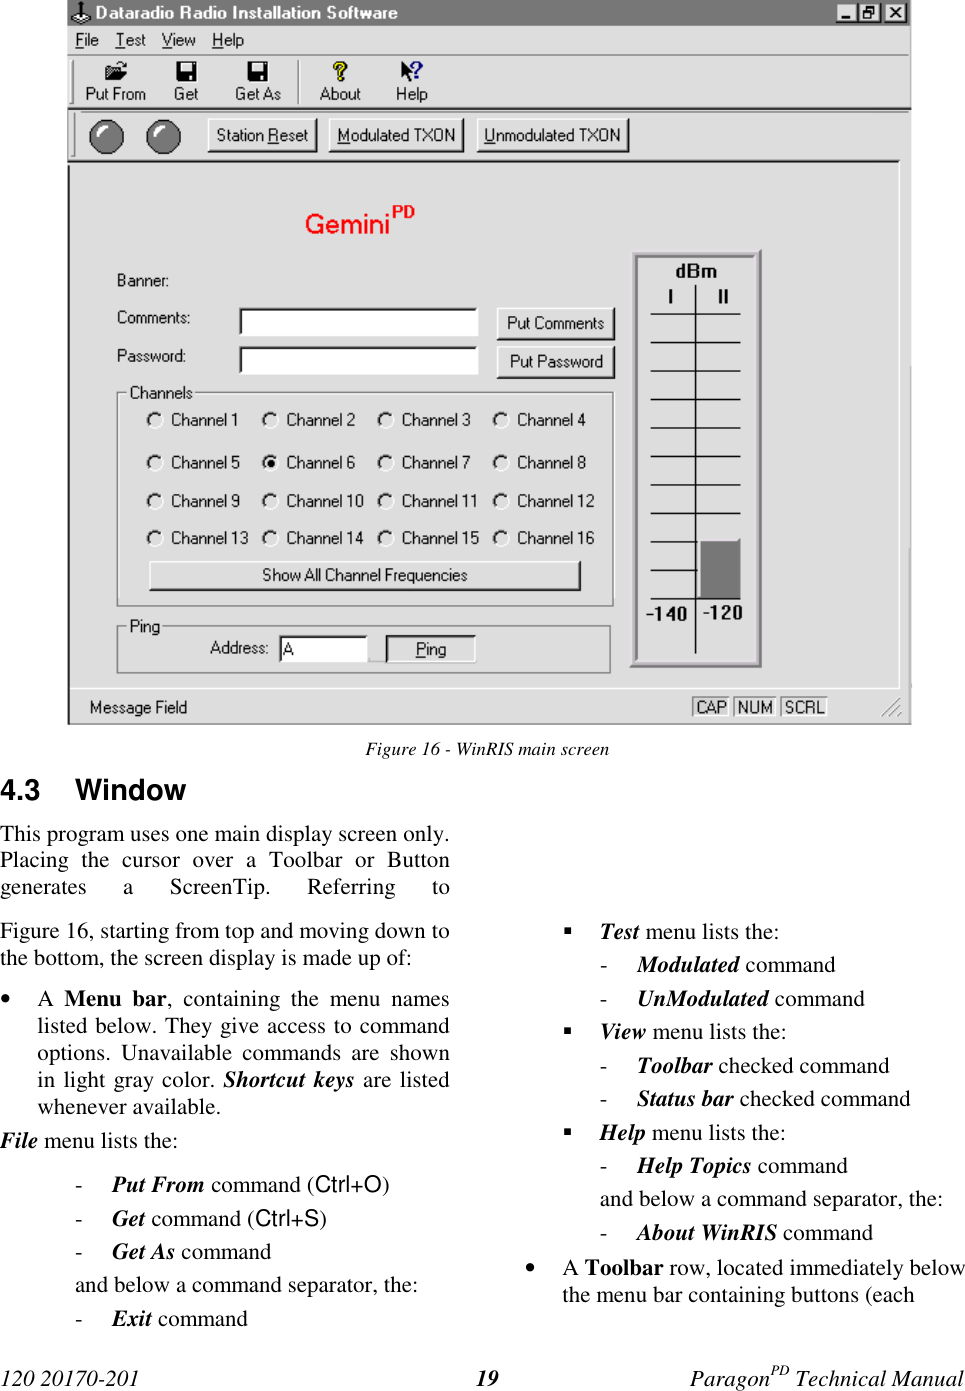 120 20170-201 ParagonPD Technical Manual19Figure 16 - WinRIS main screen4.3 WindowThis program uses one main display screen only.Placing the cursor over a Toolbar or Buttongenerates a ScreenTip. Referring toFigure 16, starting from top and moving down tothe bottom, the screen display is made up of:• A  Menu bar, containing the menu nameslisted below. They give access to commandoptions. Unavailable commands are shownin light gray color. Shortcut keys are listedwhenever available.File menu lists the:- Put From command (Ctrl+O)- Get command (Ctrl+S)- Get As commandand below a command separator, the:- Exit command! Test menu lists the:- Modulated command- UnModulated command! View menu lists the:- Toolbar checked command- Status bar checked command! Help menu lists the:- Help Topics commandand below a command separator, the:- About WinRIS command• A Toolbar row, located immediately belowthe menu bar containing buttons (each